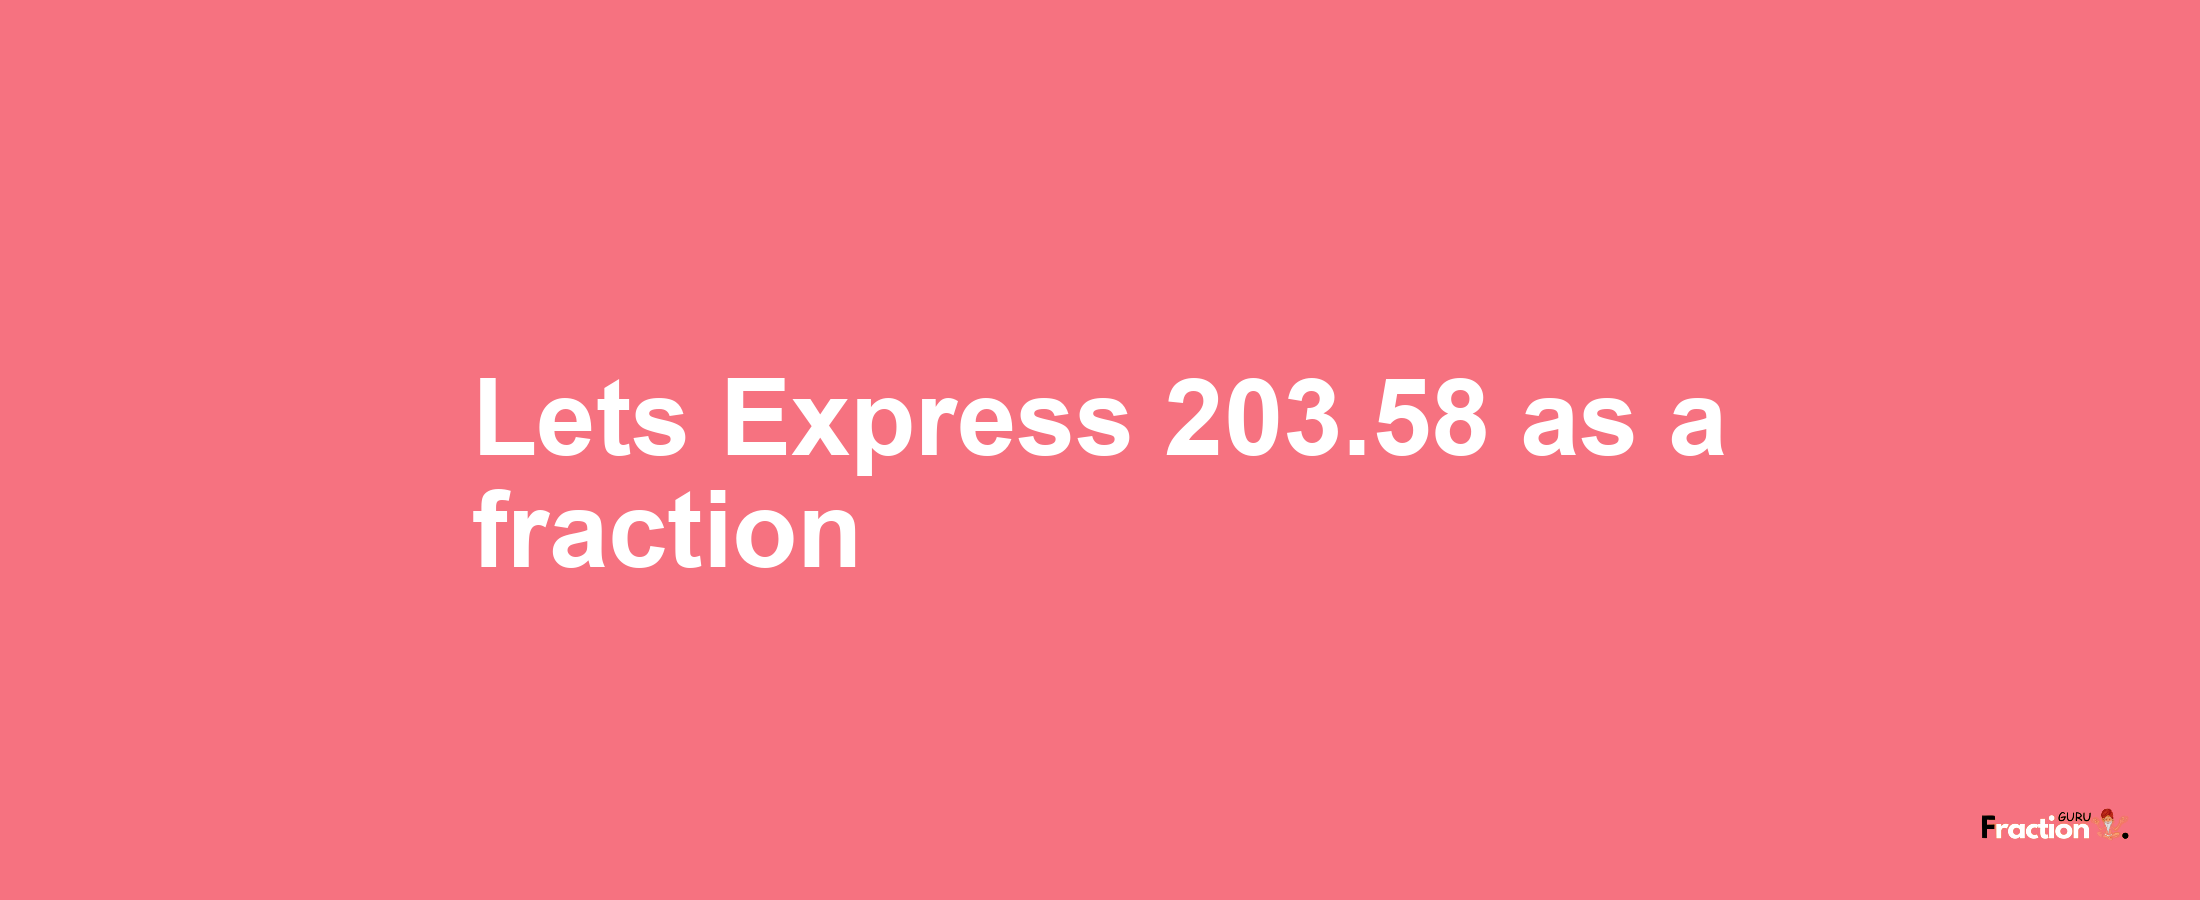 Lets Express 203.58 as afraction